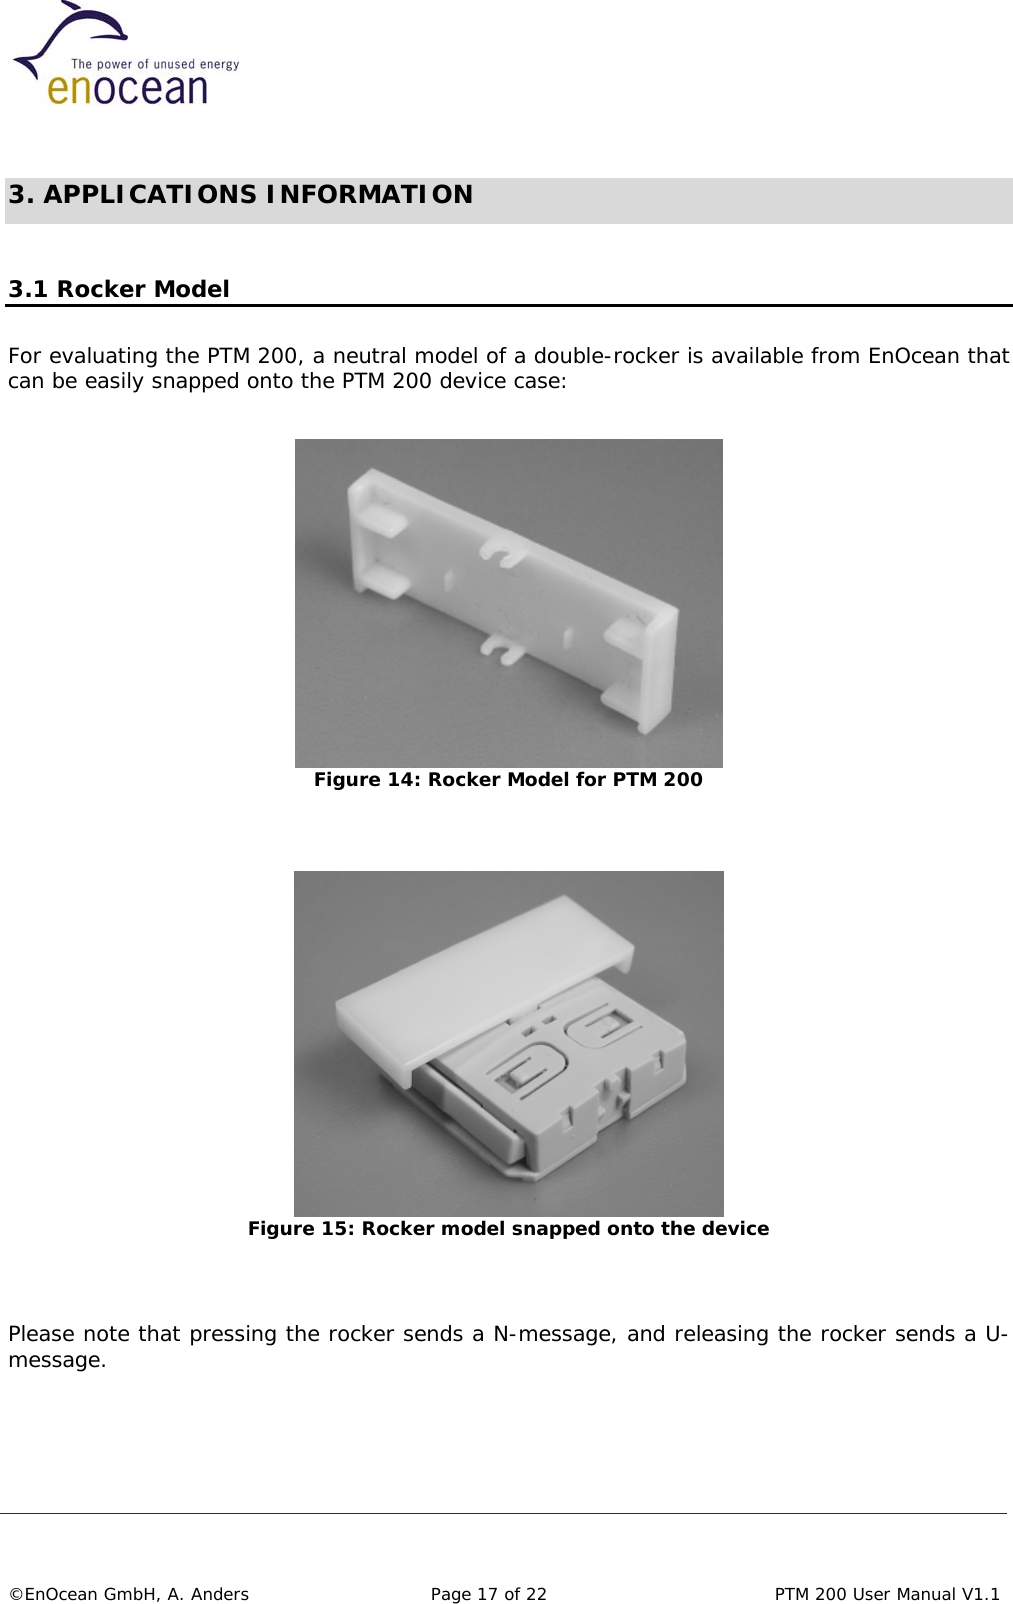   3. APPLICATIONS INFORMATION  3.1 Rocker Model For evaluating the PTM 200, a neutral model of a double-rocker is available from EnOcean that can be easily snapped onto the PTM 200 device case:   Figure 14: Rocker Model for PTM 200    Figure 15: Rocker model snapped onto the device   Please note that pressing the rocker sends a N-message, and releasing the rocker sends a U-message.       ©EnOcean GmbH, A. Anders   Page 17 of 22    PTM 200 User Manual V1.1  